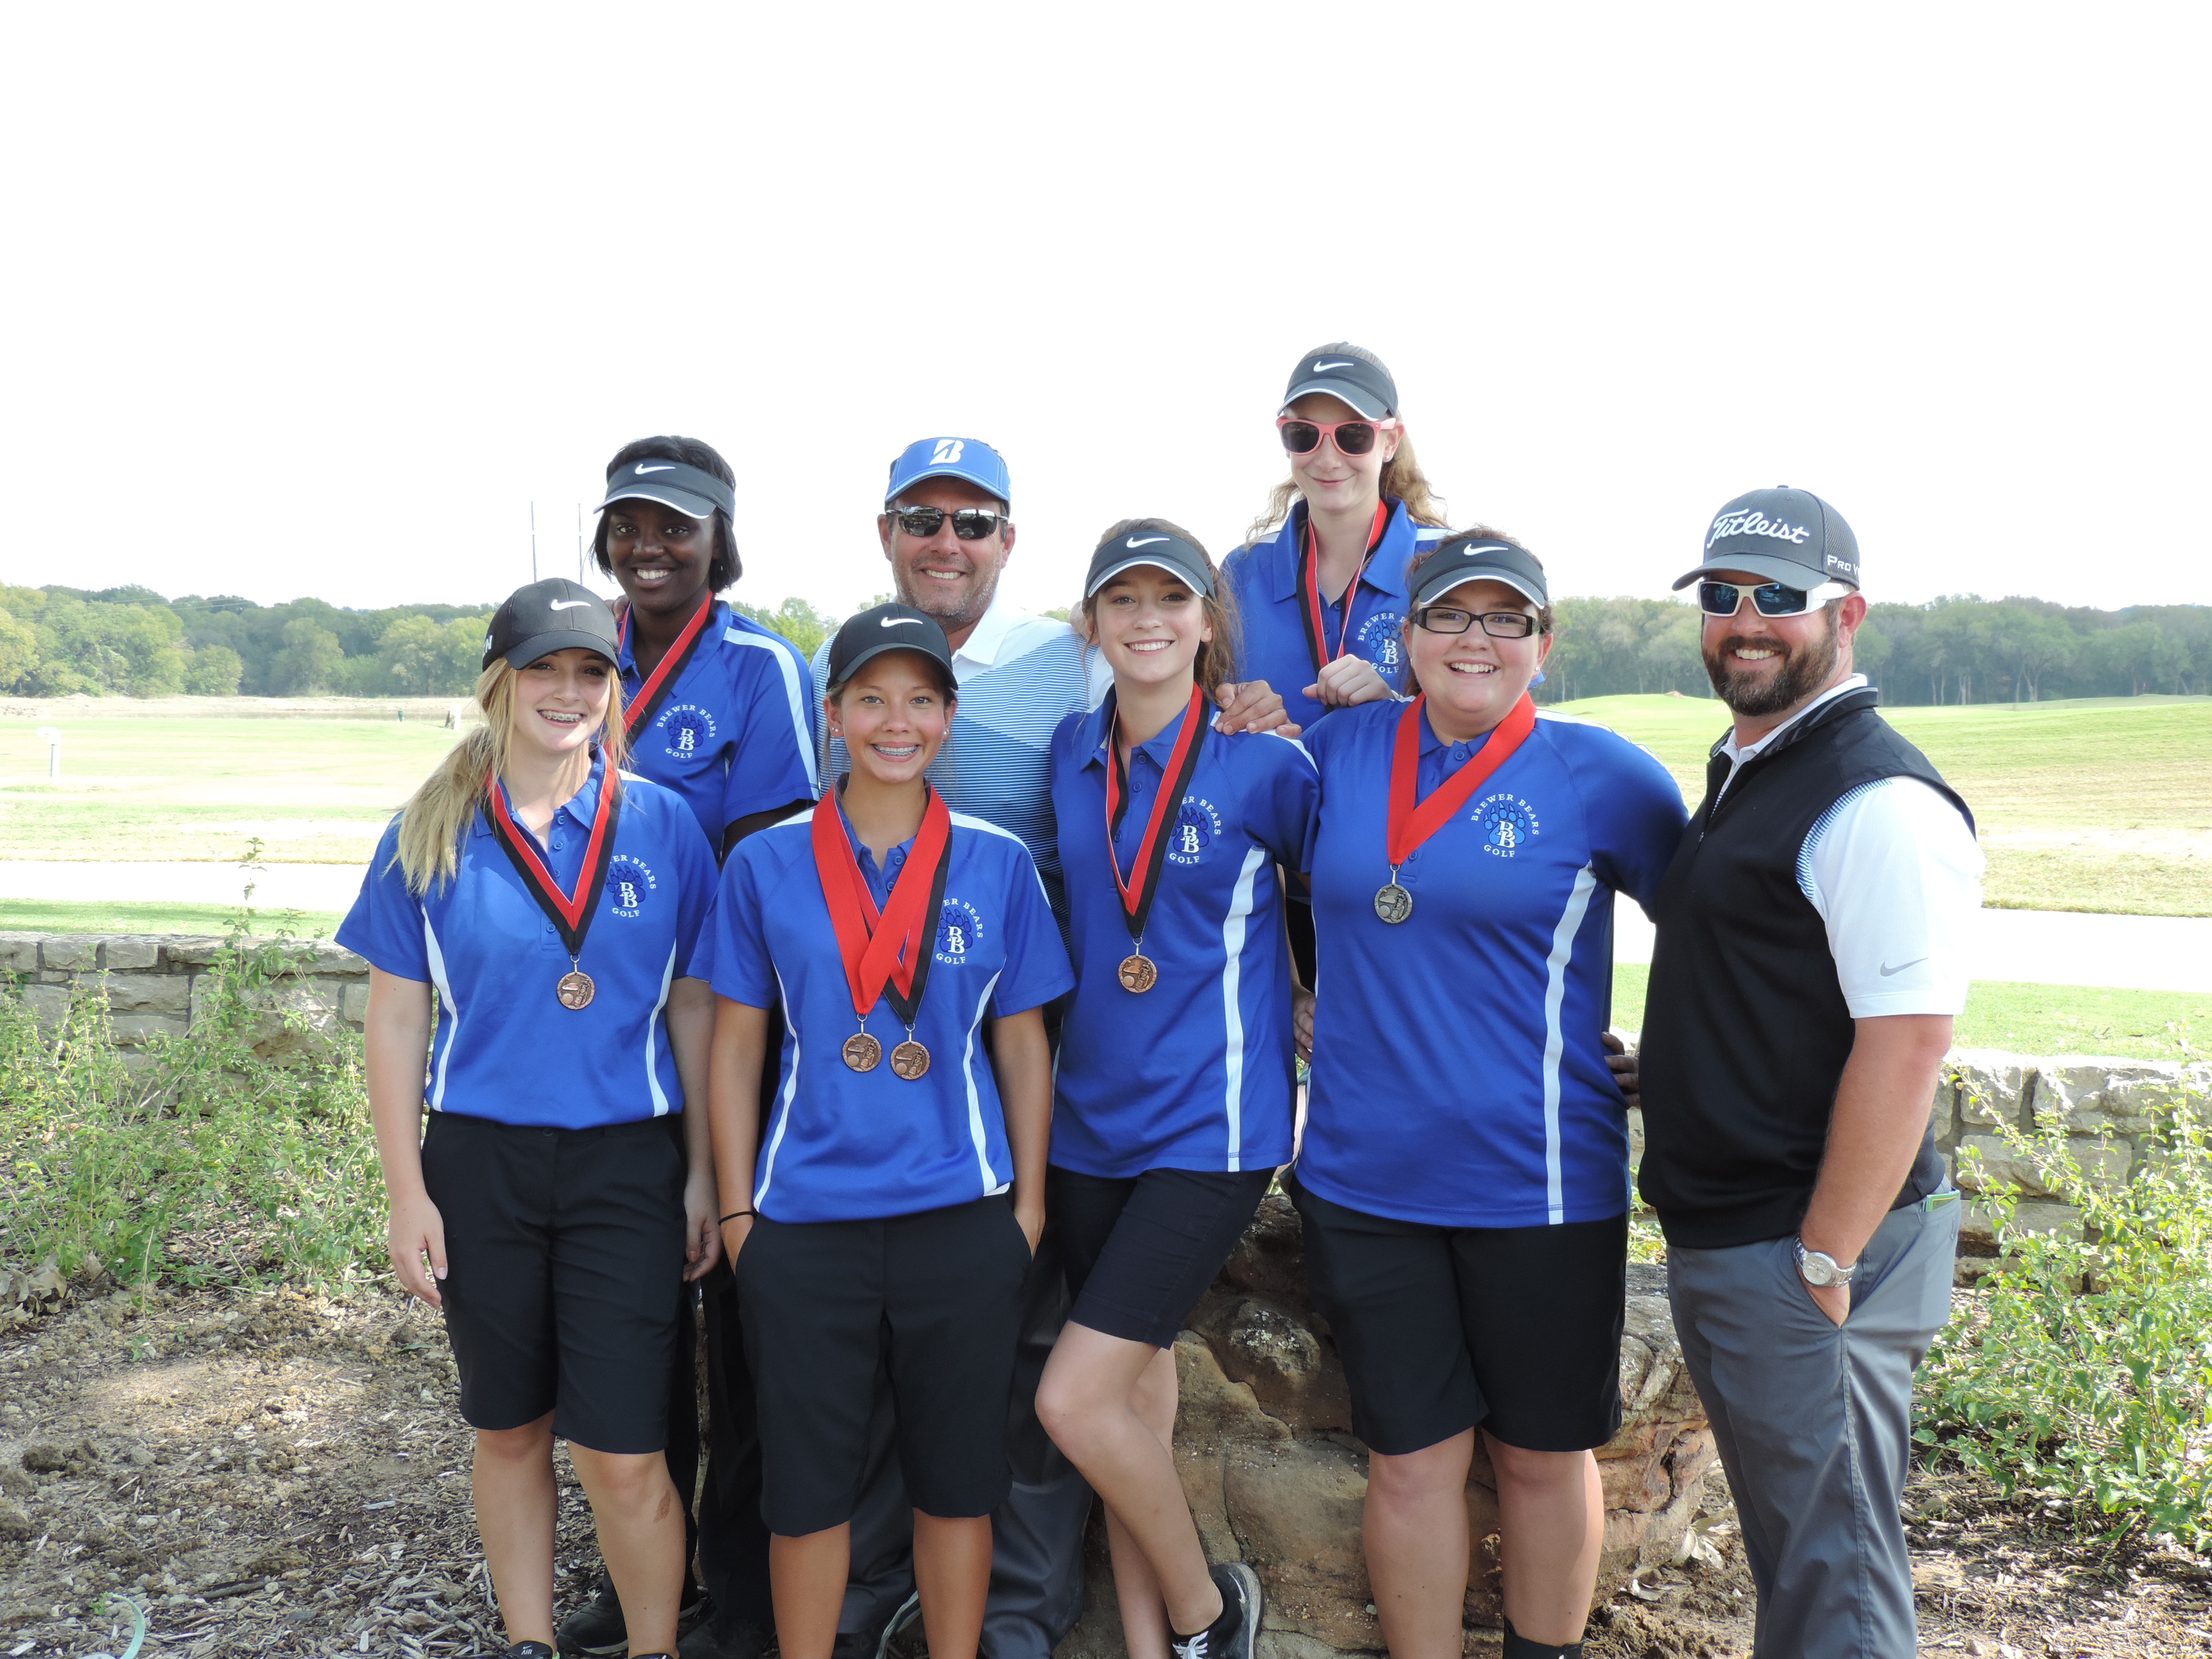 ... golf team took third place at the southern oaks golf tournament on oct